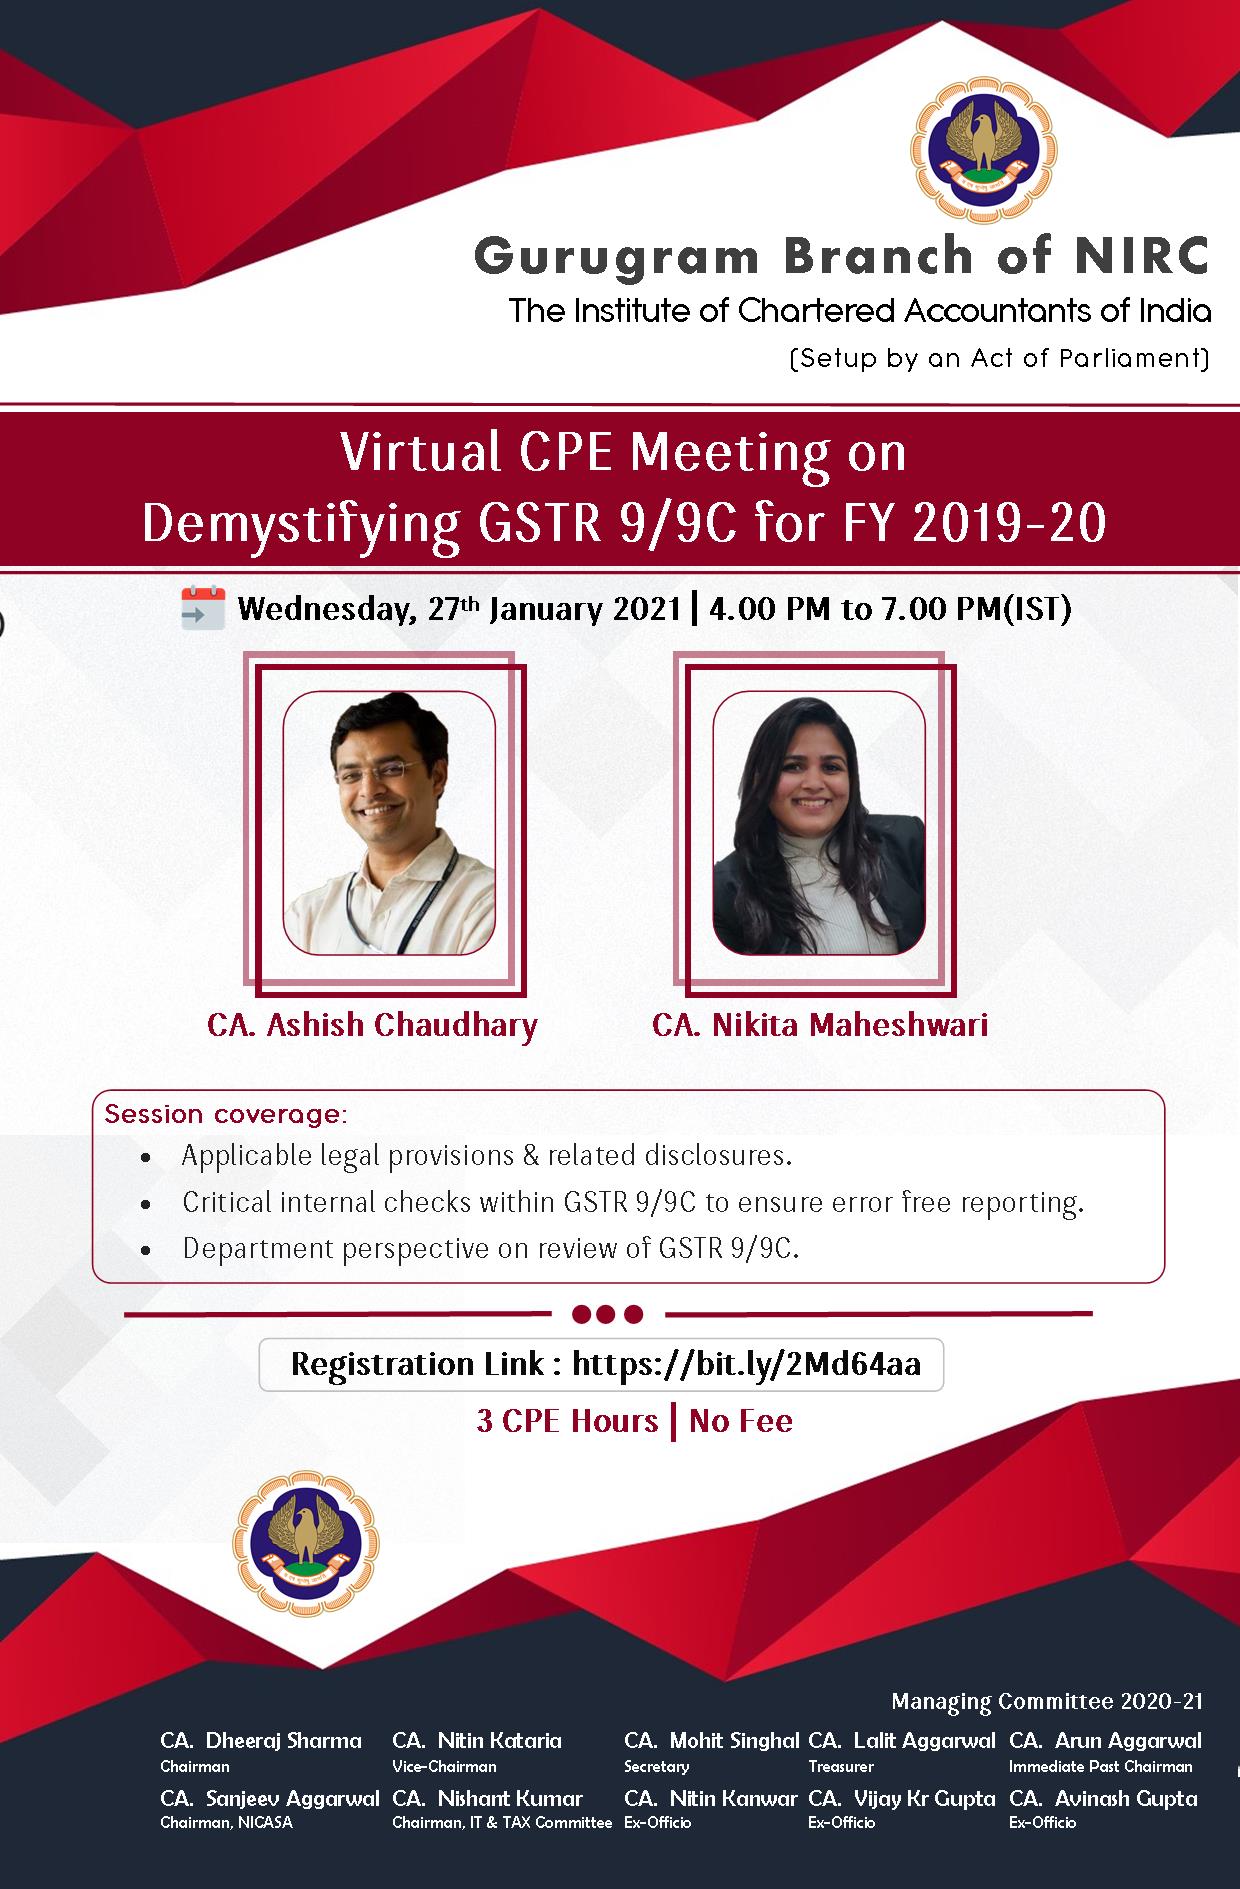 Virtual CPE Meeting on Demystifying GSTR 9/9C for FY 2019-20